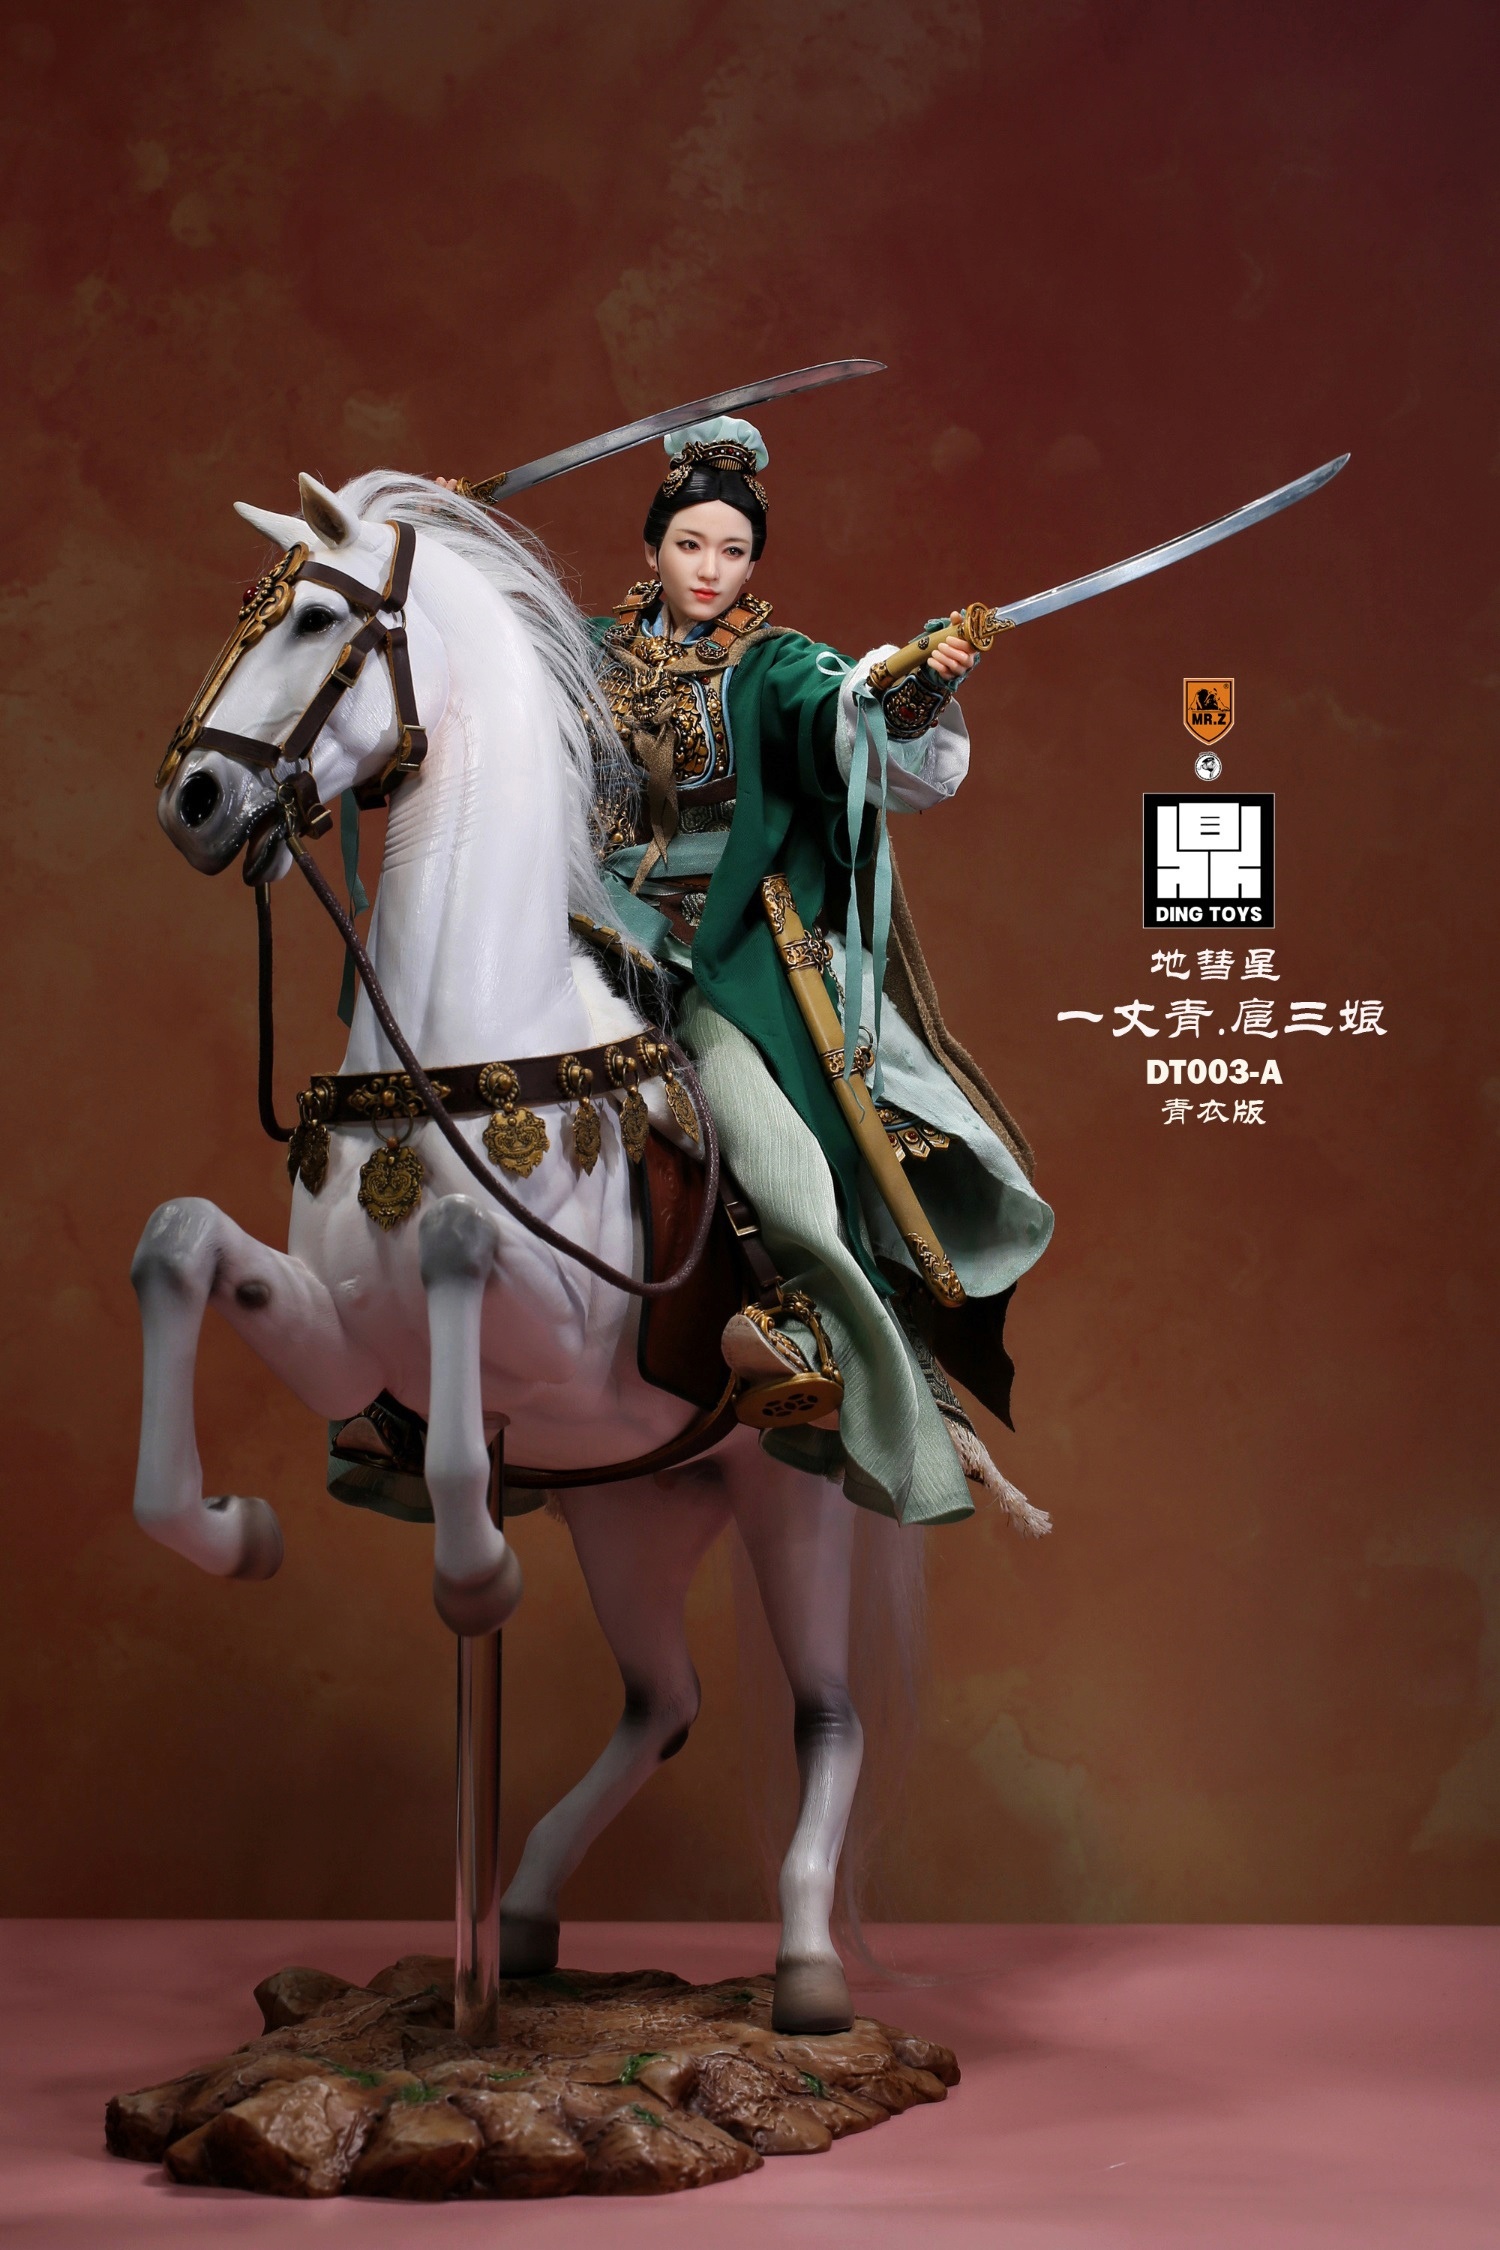 DingToys - NEW PRODUCT: Mr.Z x Ding Toys DT003 1/6 Scale 《Water Margin》Shiying Zhang (Green and Red versions), Horse (White) 12228